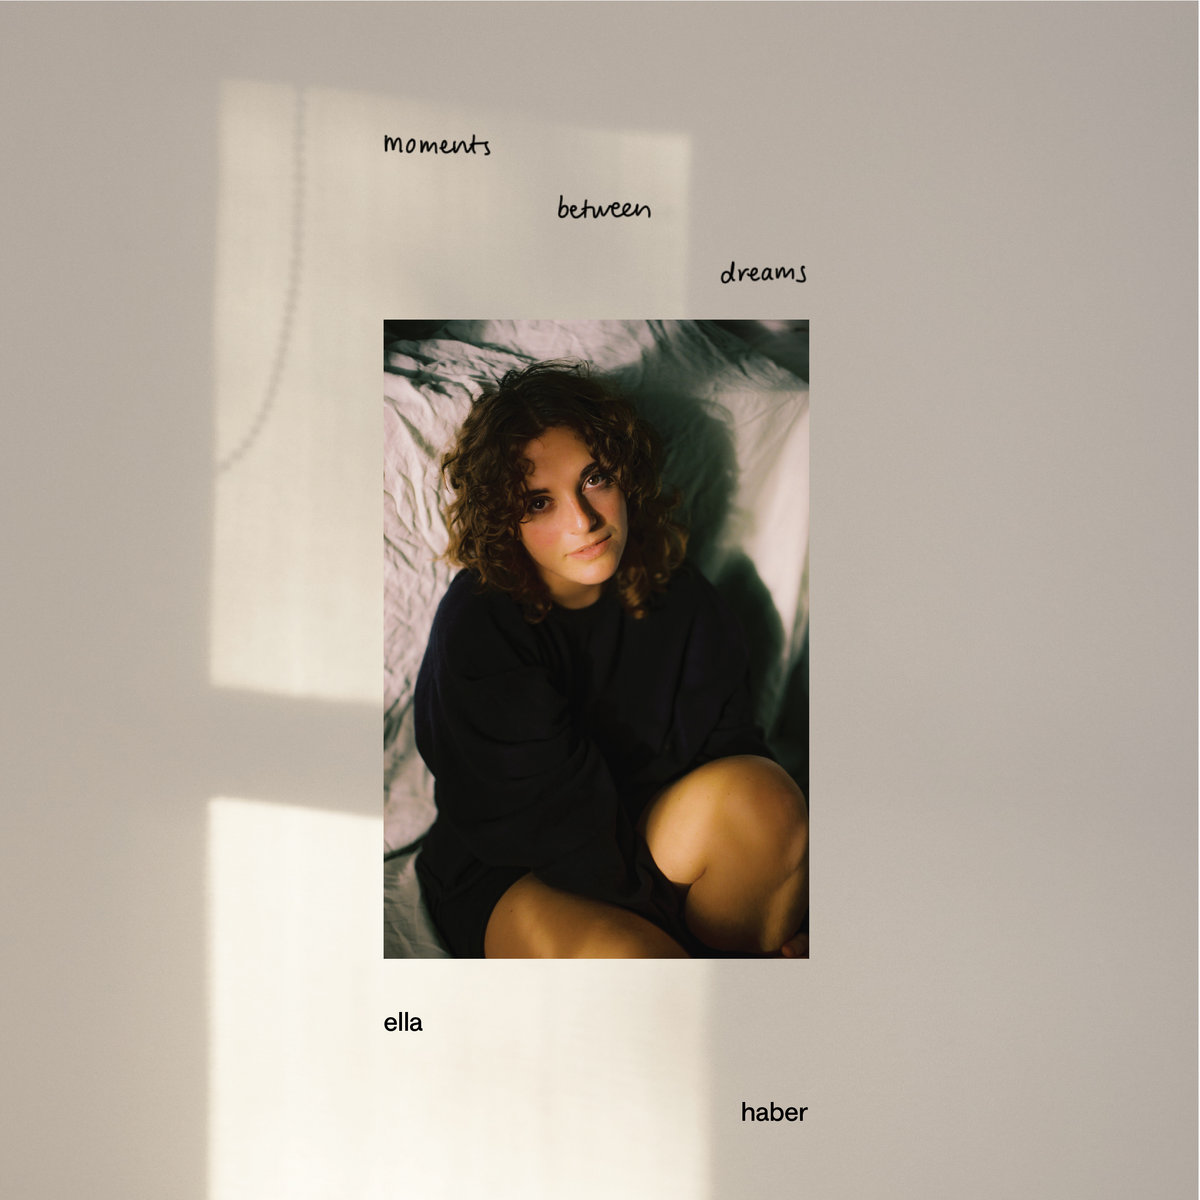 EP REVIEW: Moments Between Dreams by Ella Haber